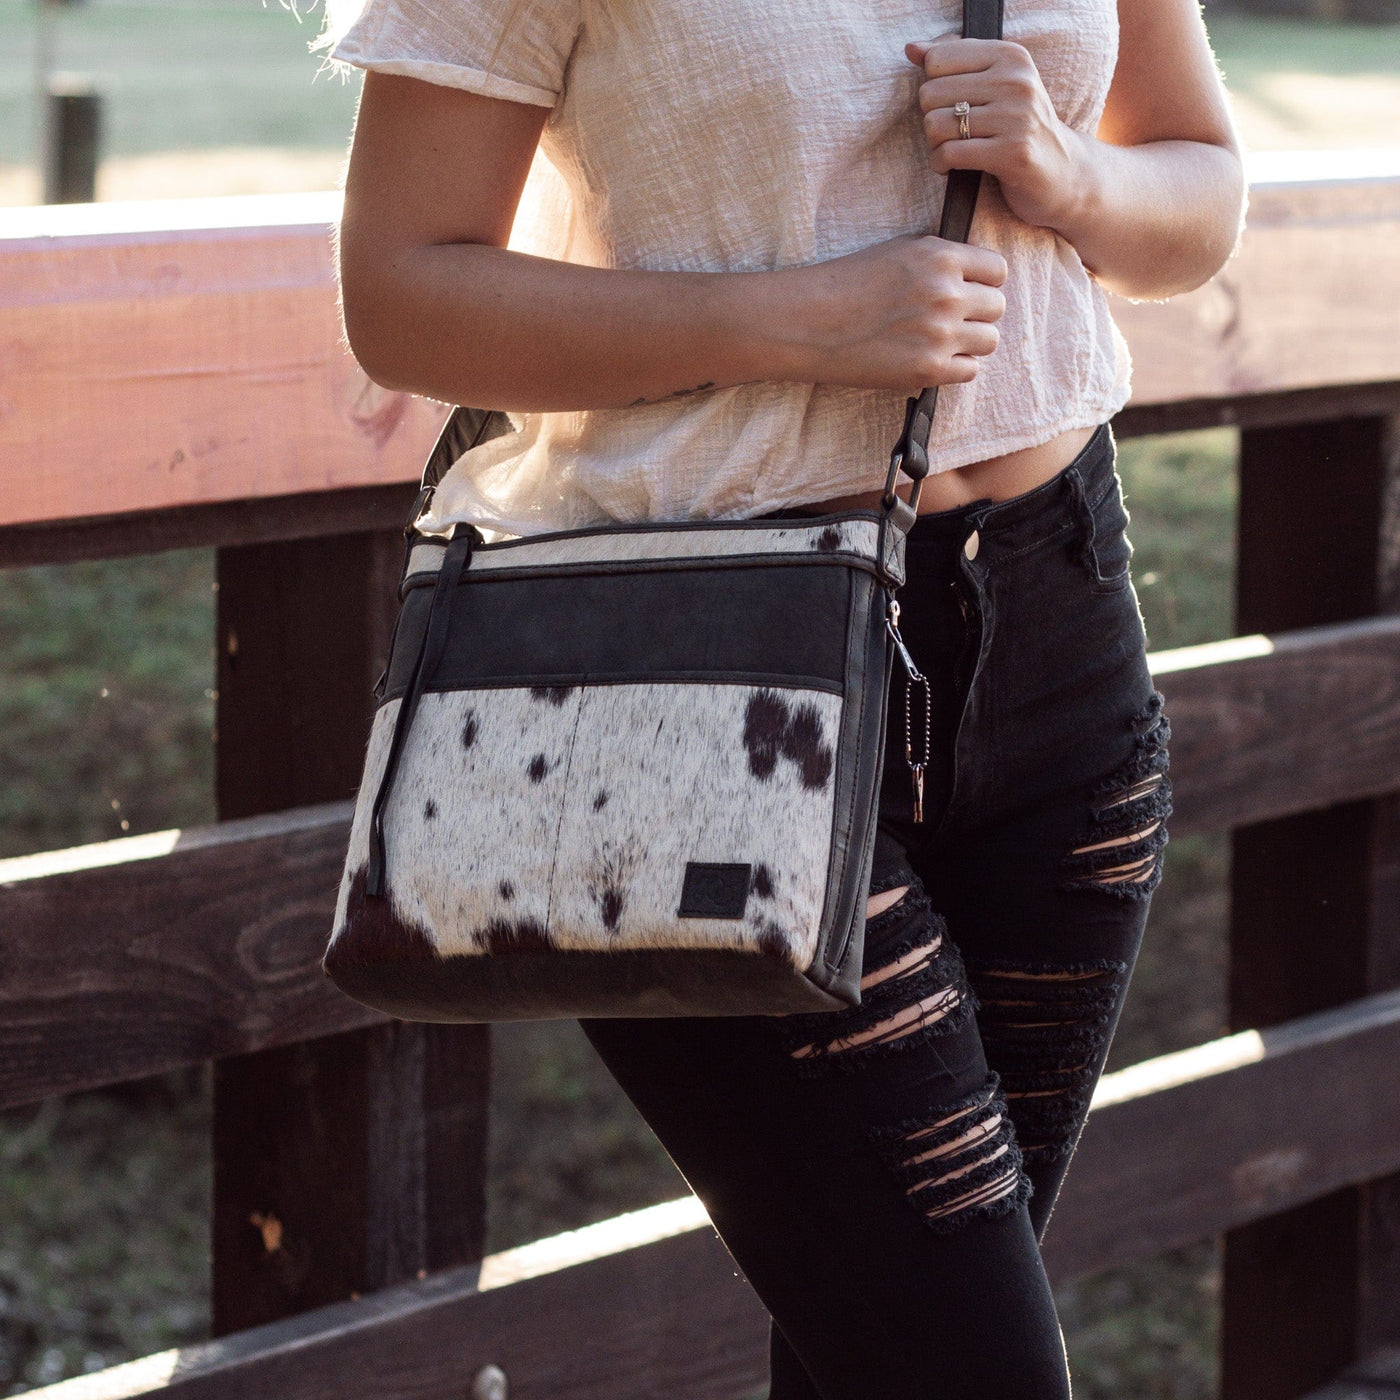 Concealed Carry Diana Crossbody by UC Leather Company -  soft leather shoulder bags for women's -  crossbody bags for everyday use -  most popular crossbody bag -  crossbody bags for guns -  crossbody handgun bag -  Unique Hide Purse -  Conceal Carry Western Purse -  Stylish CCW Bag -  Bag for Conceal Carrying Women - -  Gun Bag for Women